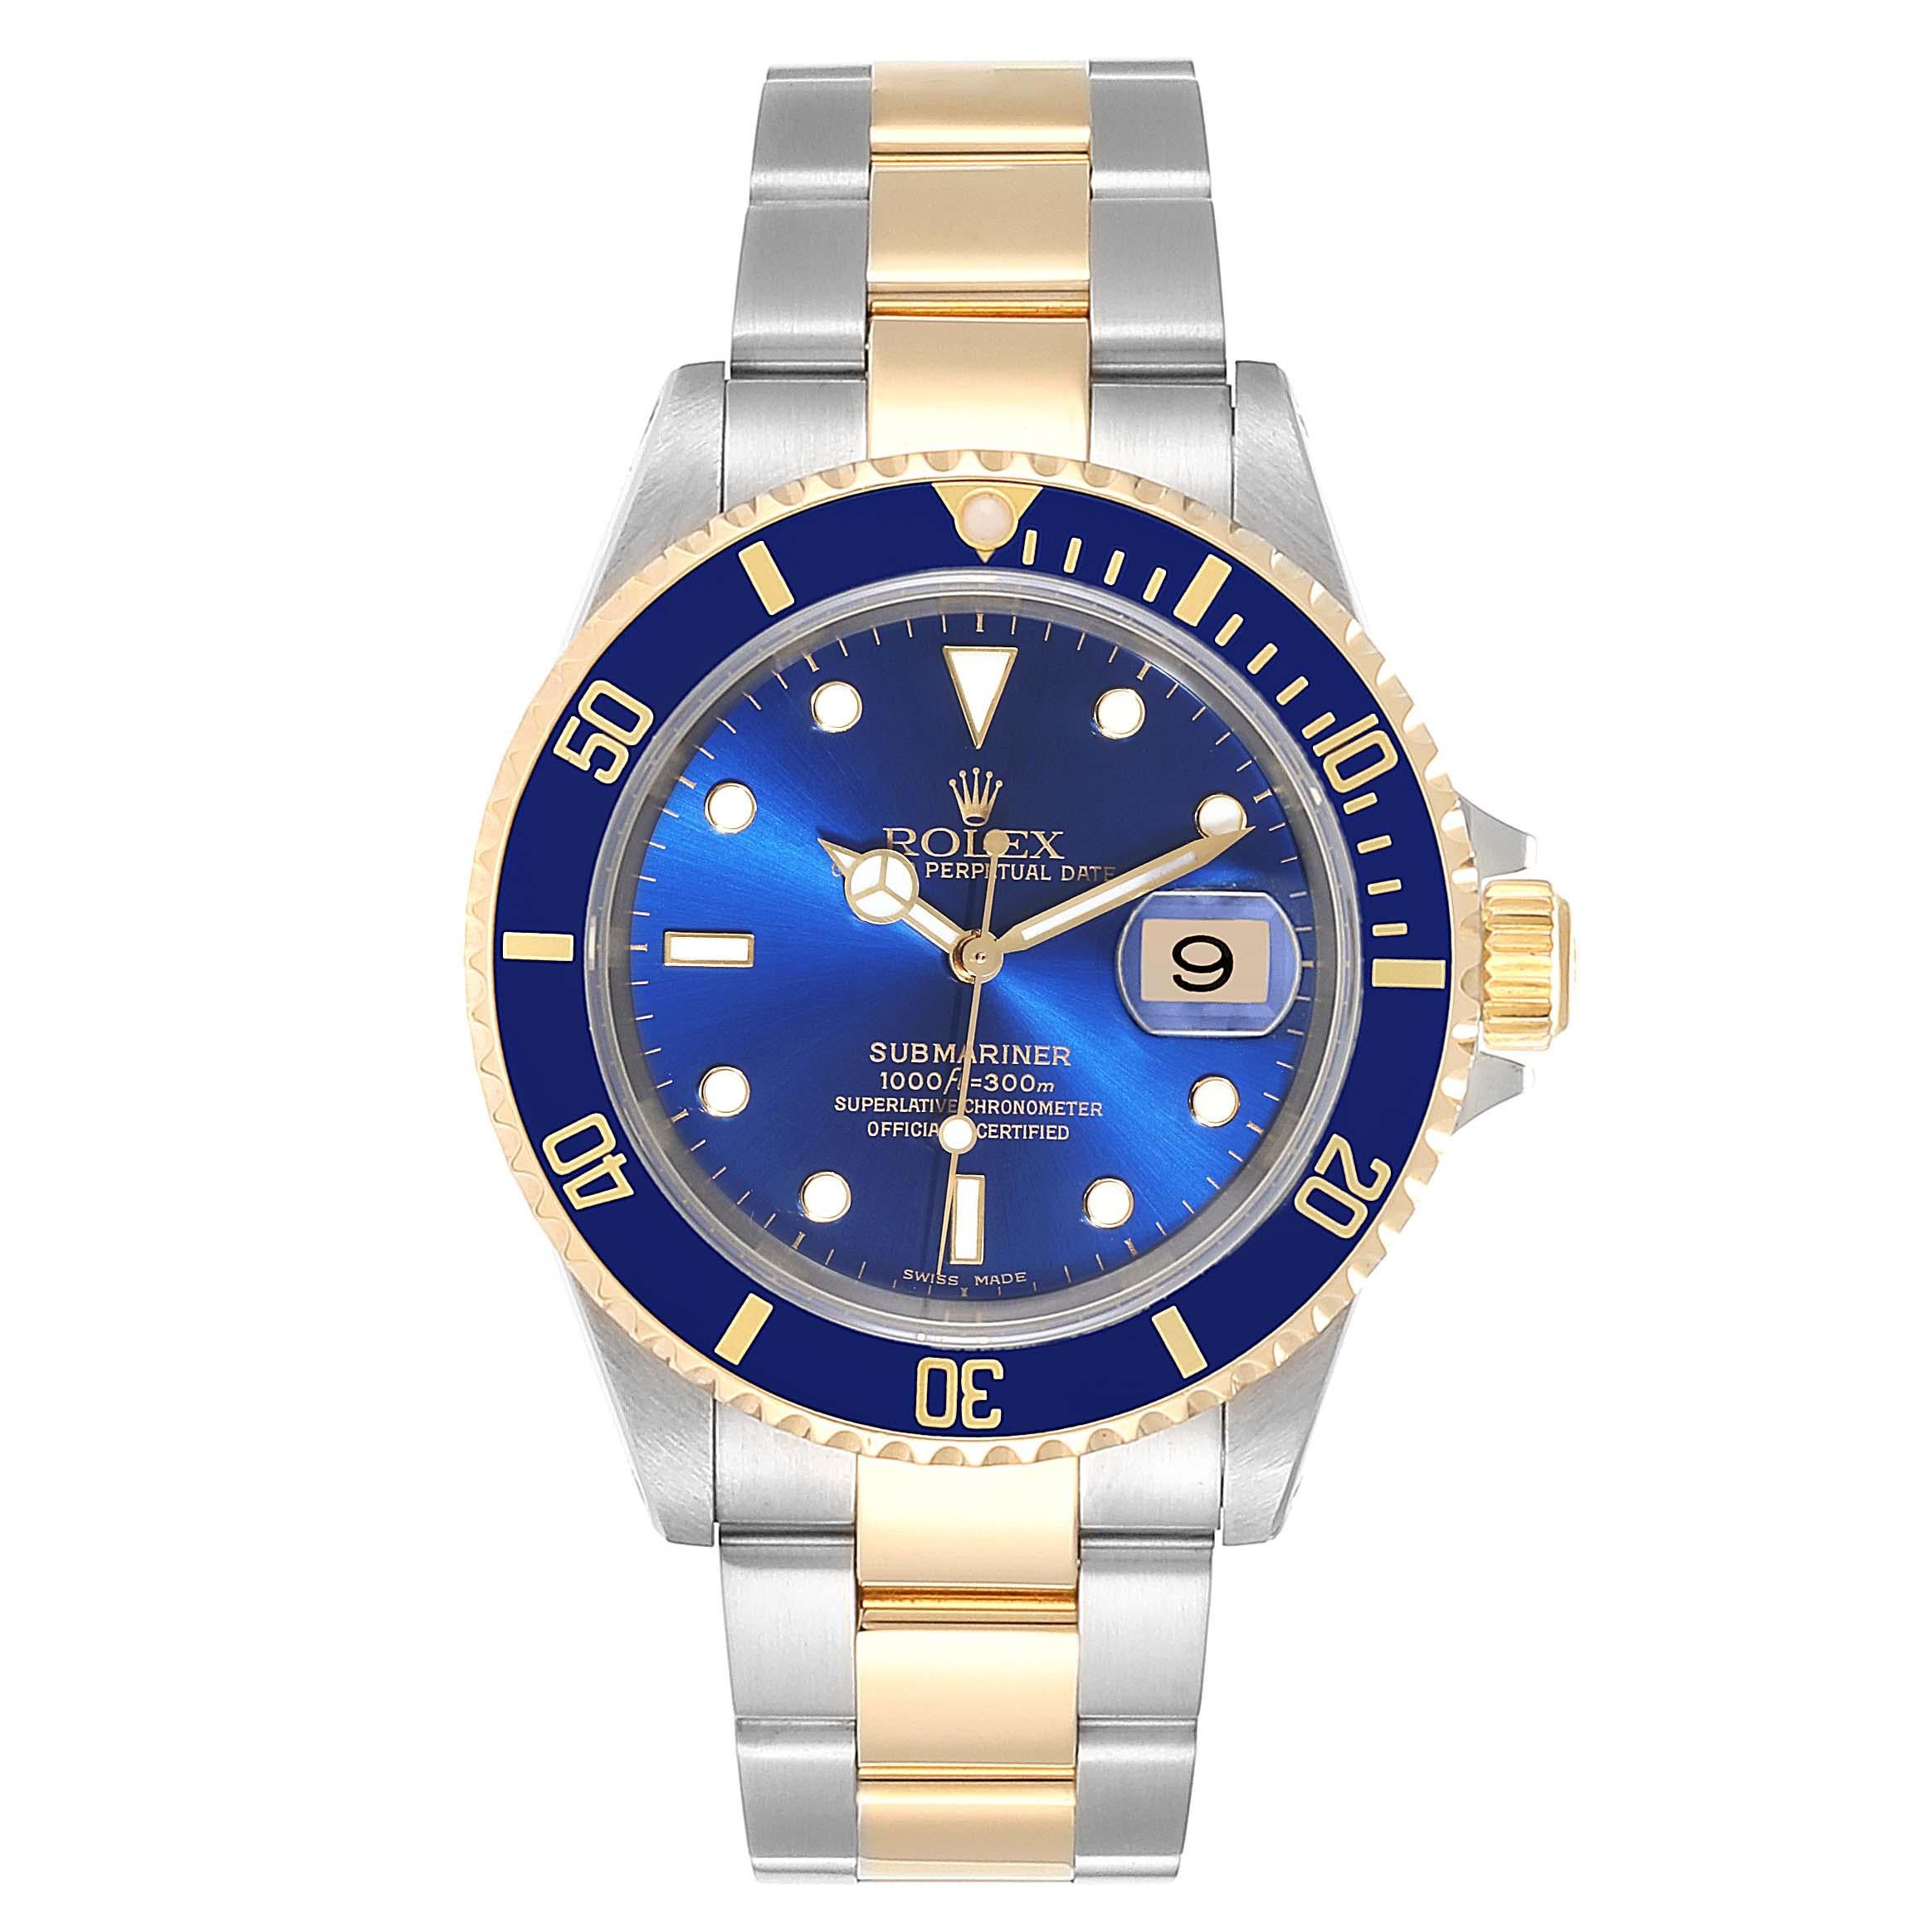 Rolex Submariner Blue Dial Bezel Steel Yellow Gold Mens Watch 16613. Officially certified chronometer self-winding movement. Stainless steel and 18k yellow gold case 40 mm in diameter. Rolex logo on a crown. Blue insert special time-lapse